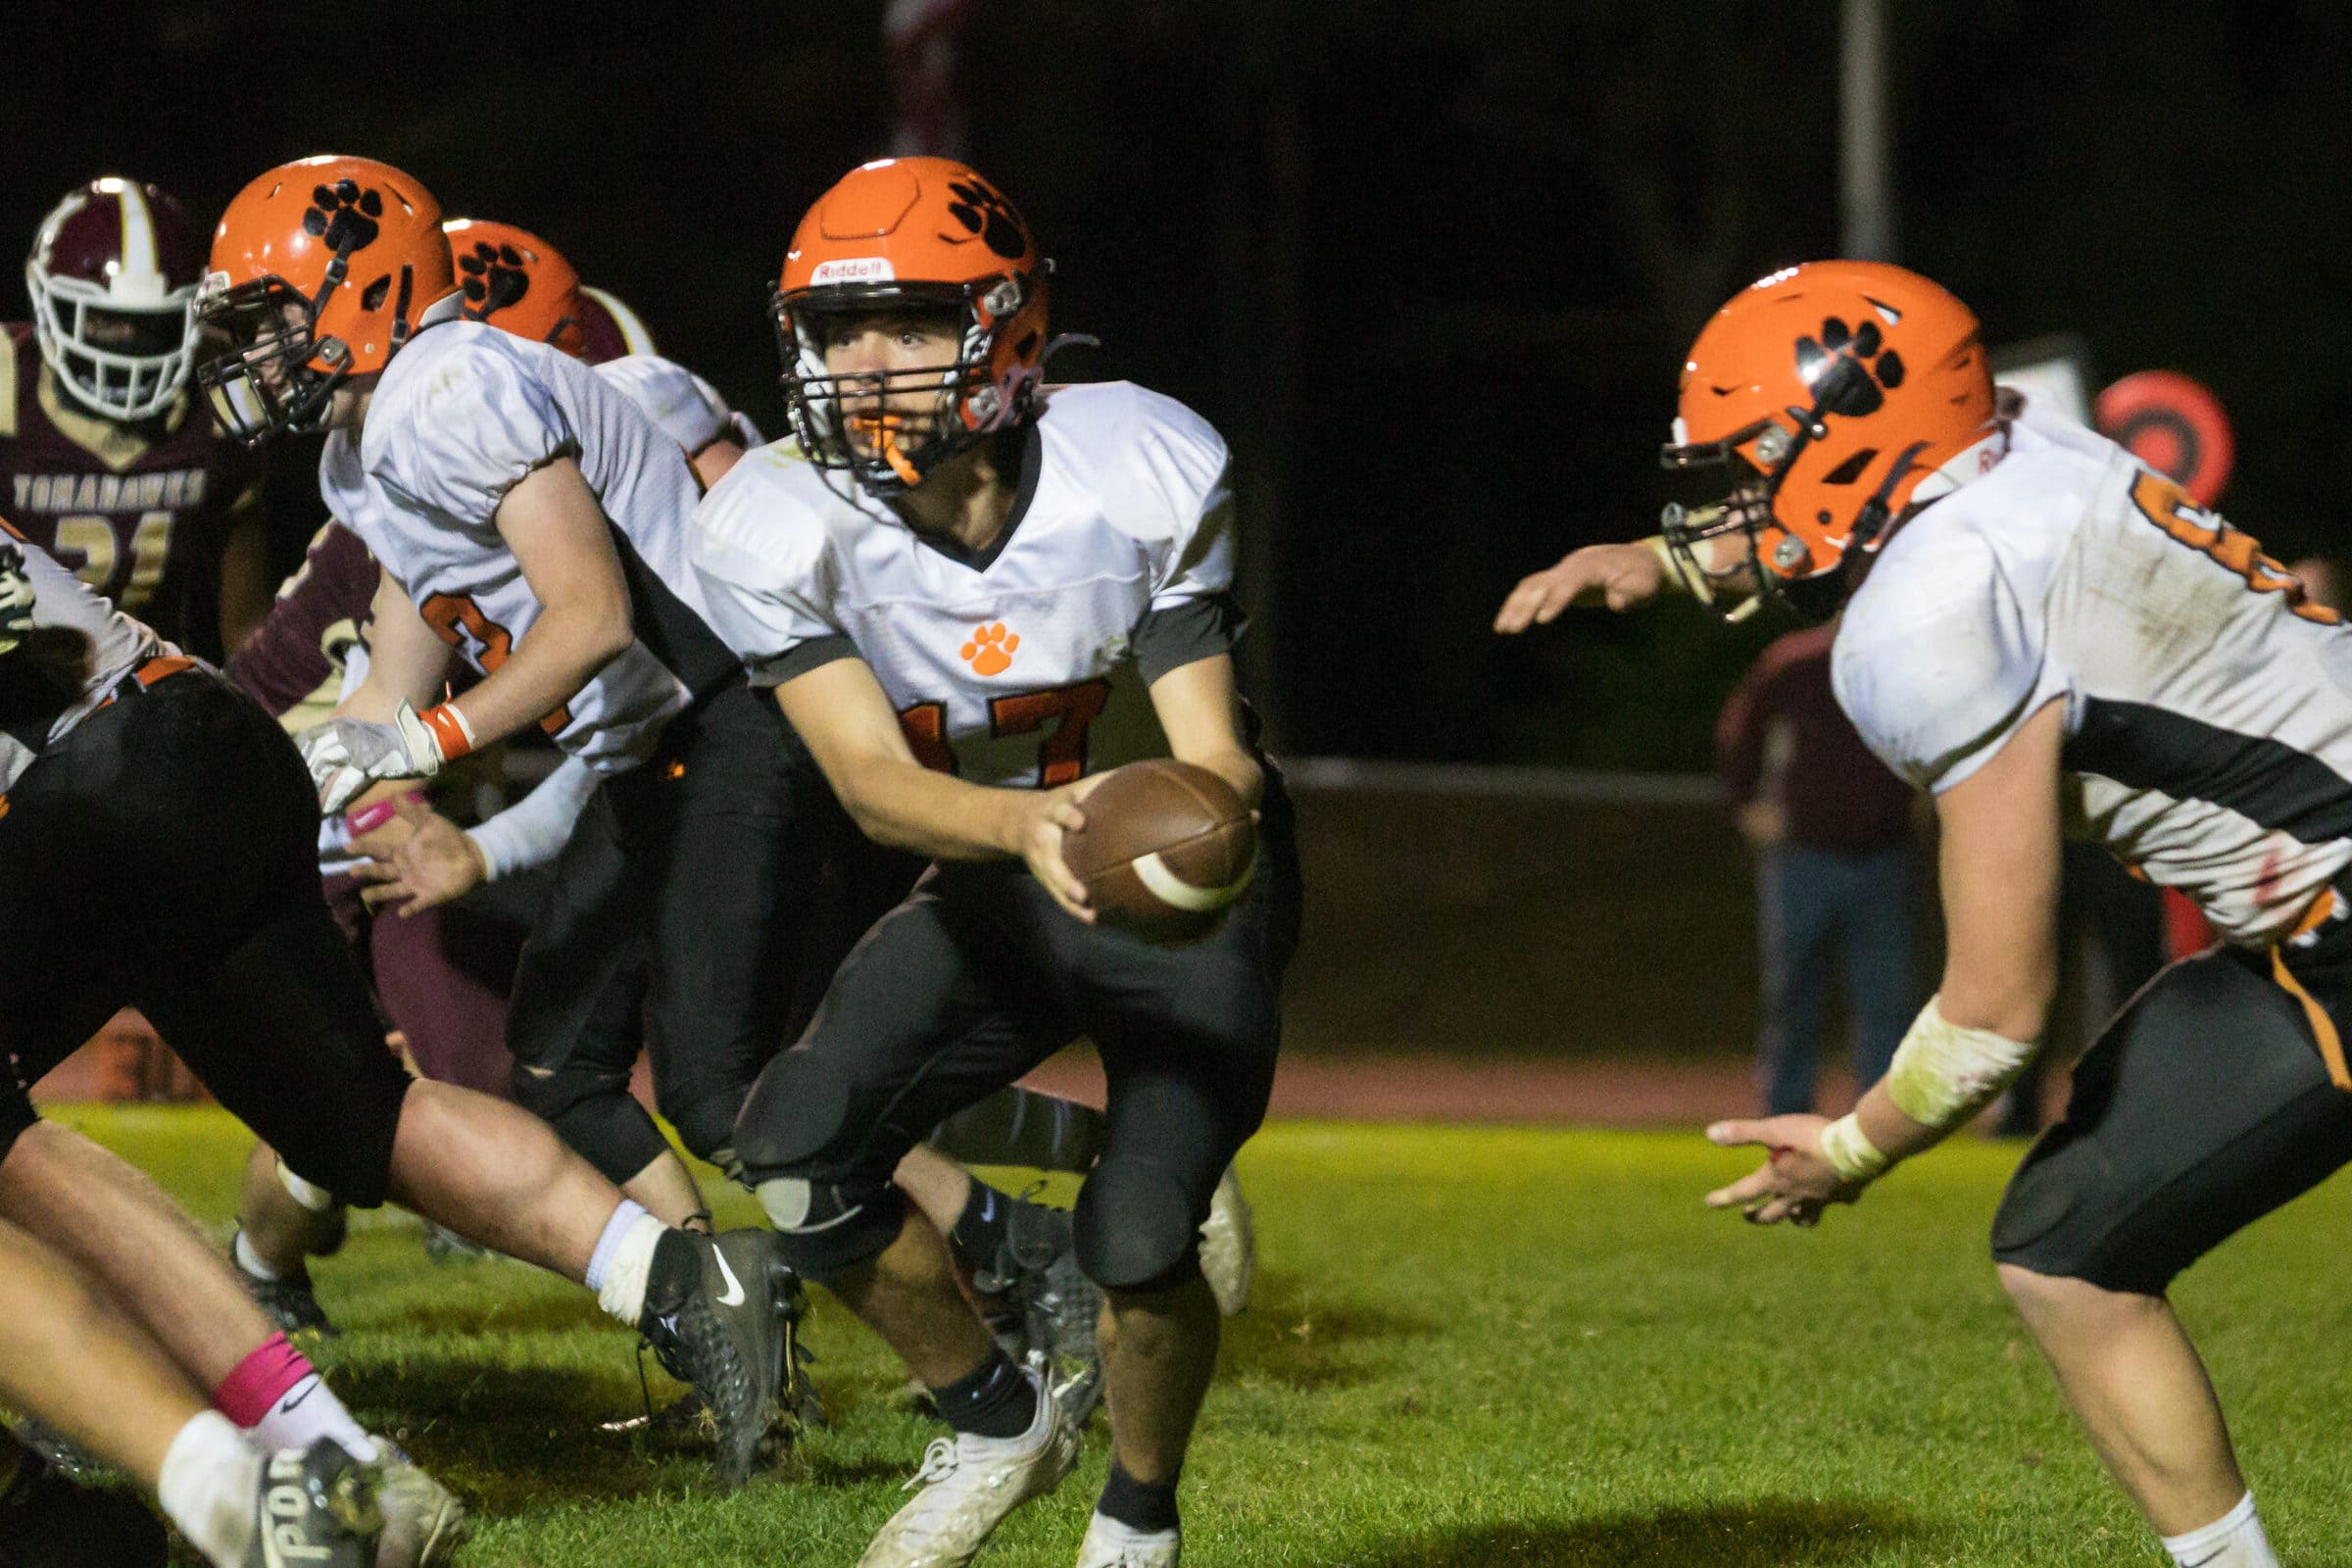 A Marlborough running back charges toward the line of scrimmage during his team’s game against Algonquin.